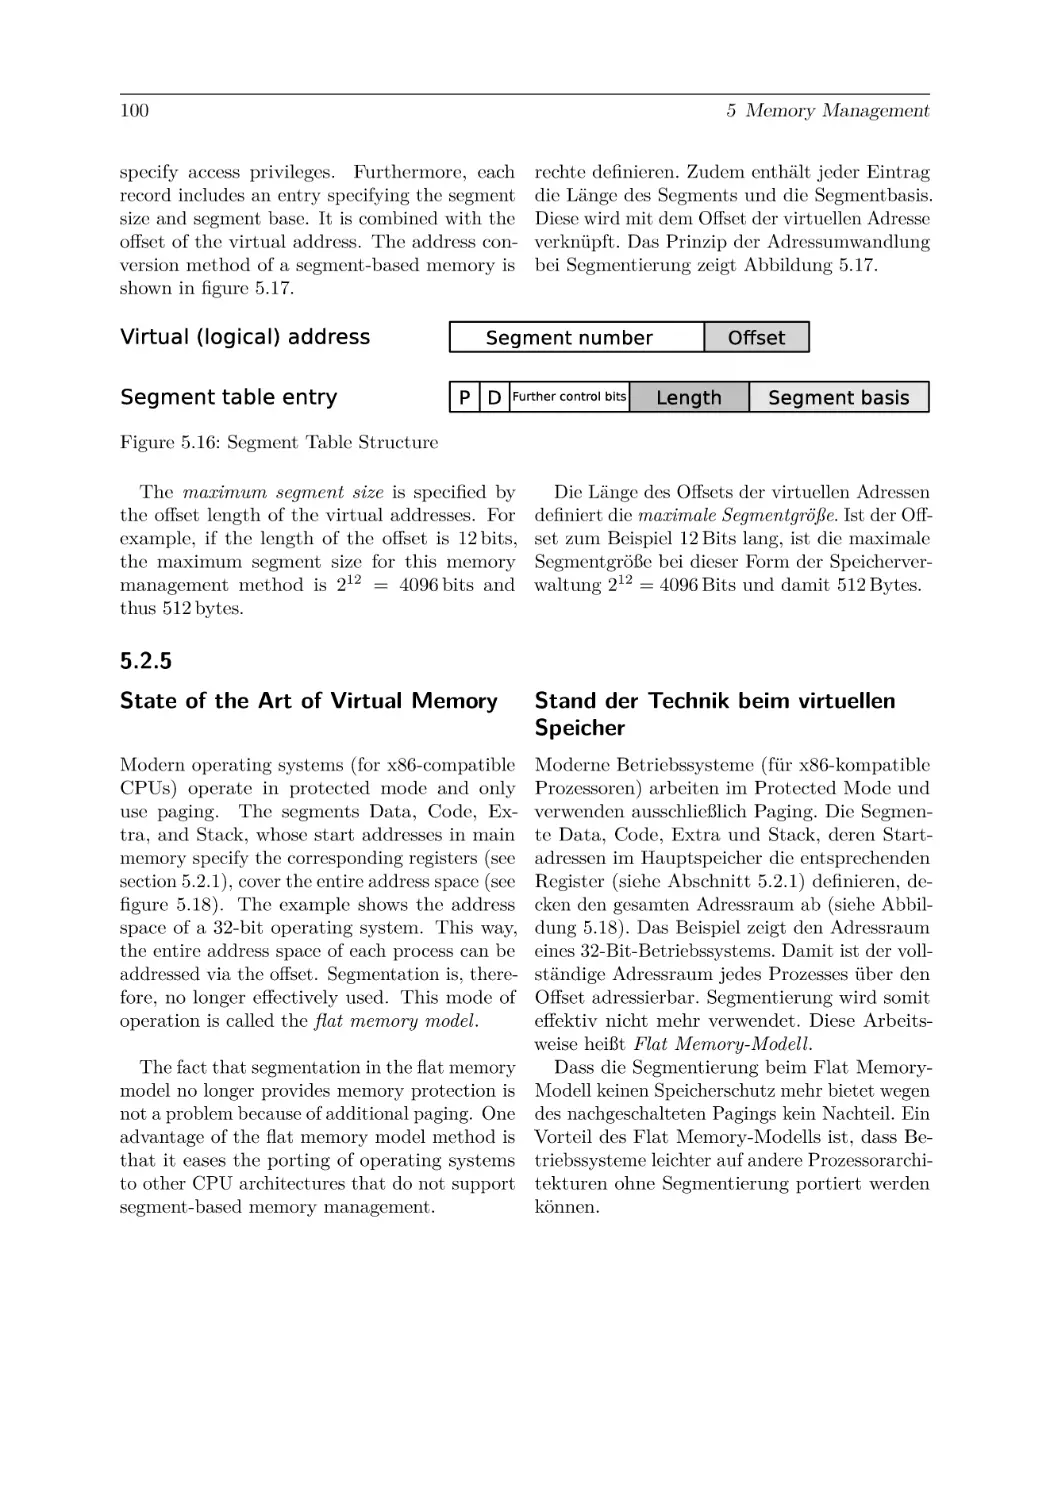 5.2.5
State of the Art of Virtual Memory